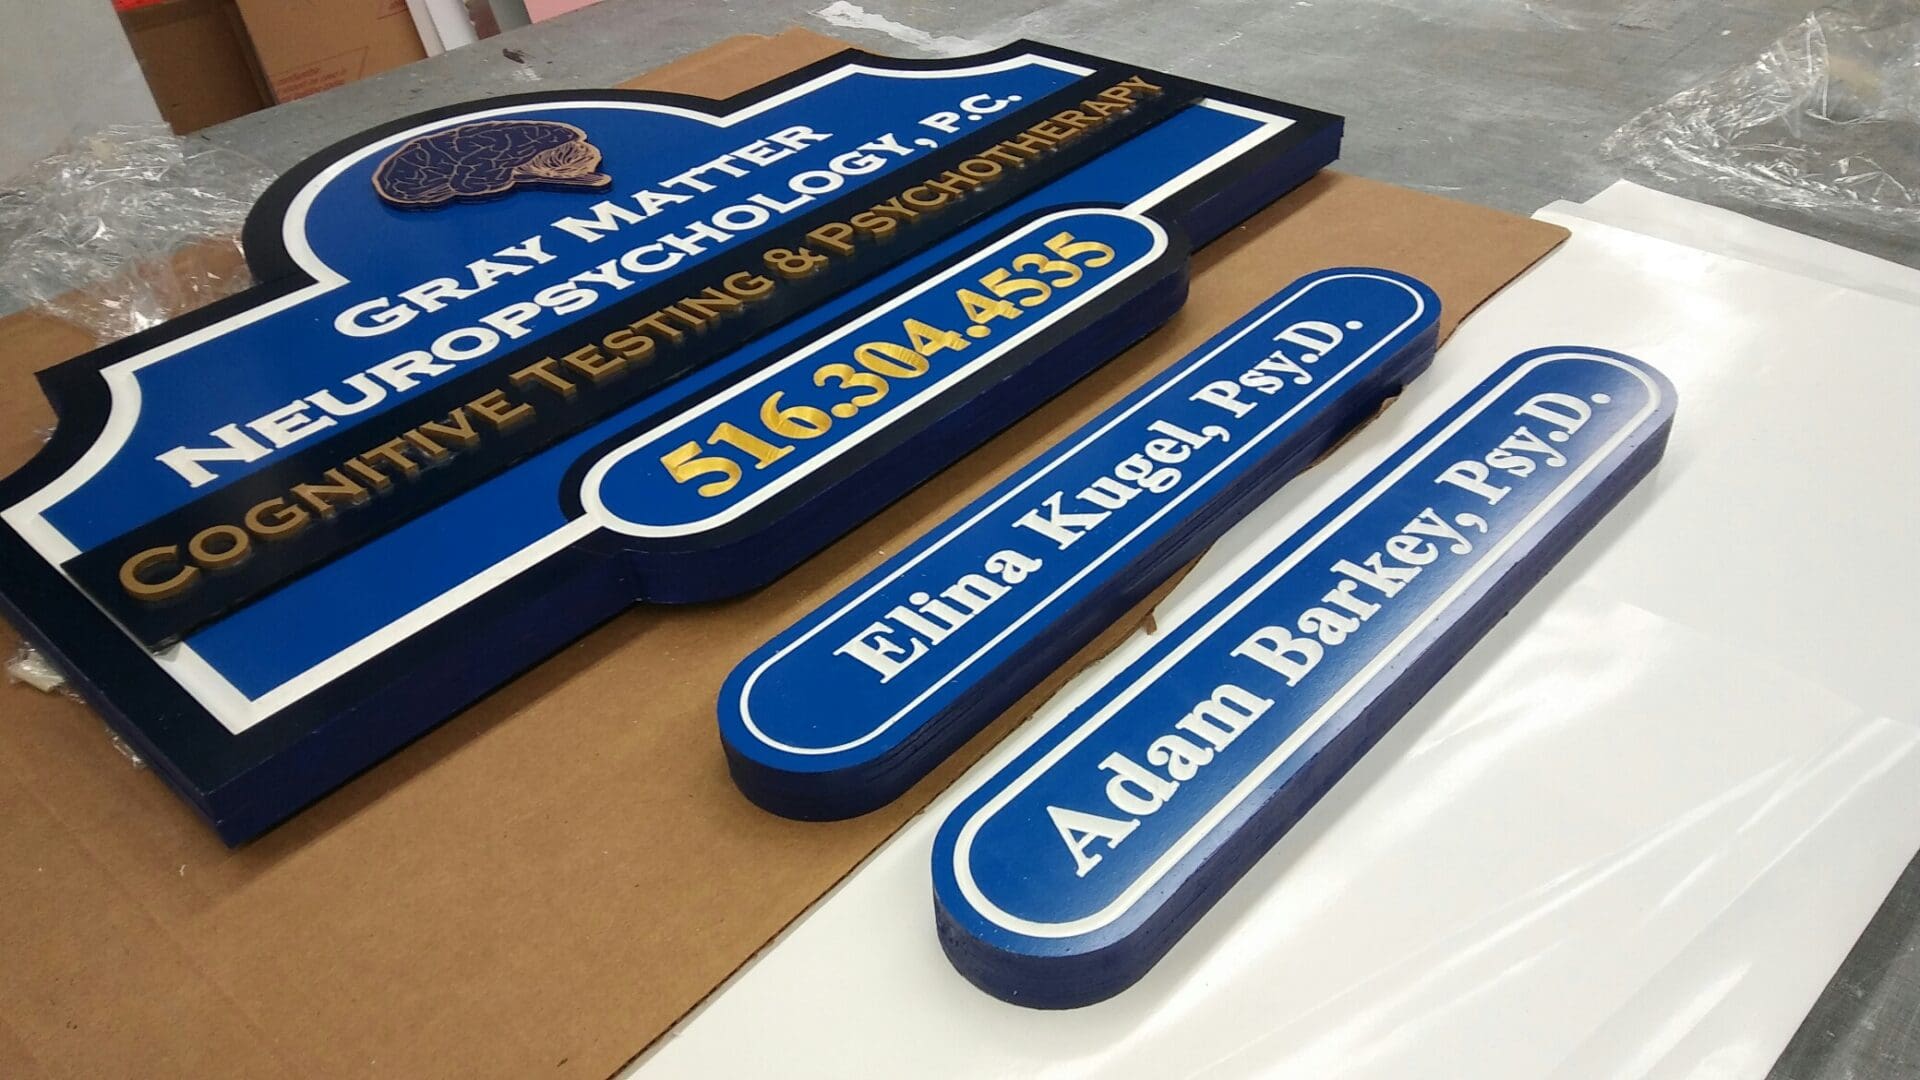 Three-dimensional signage for 